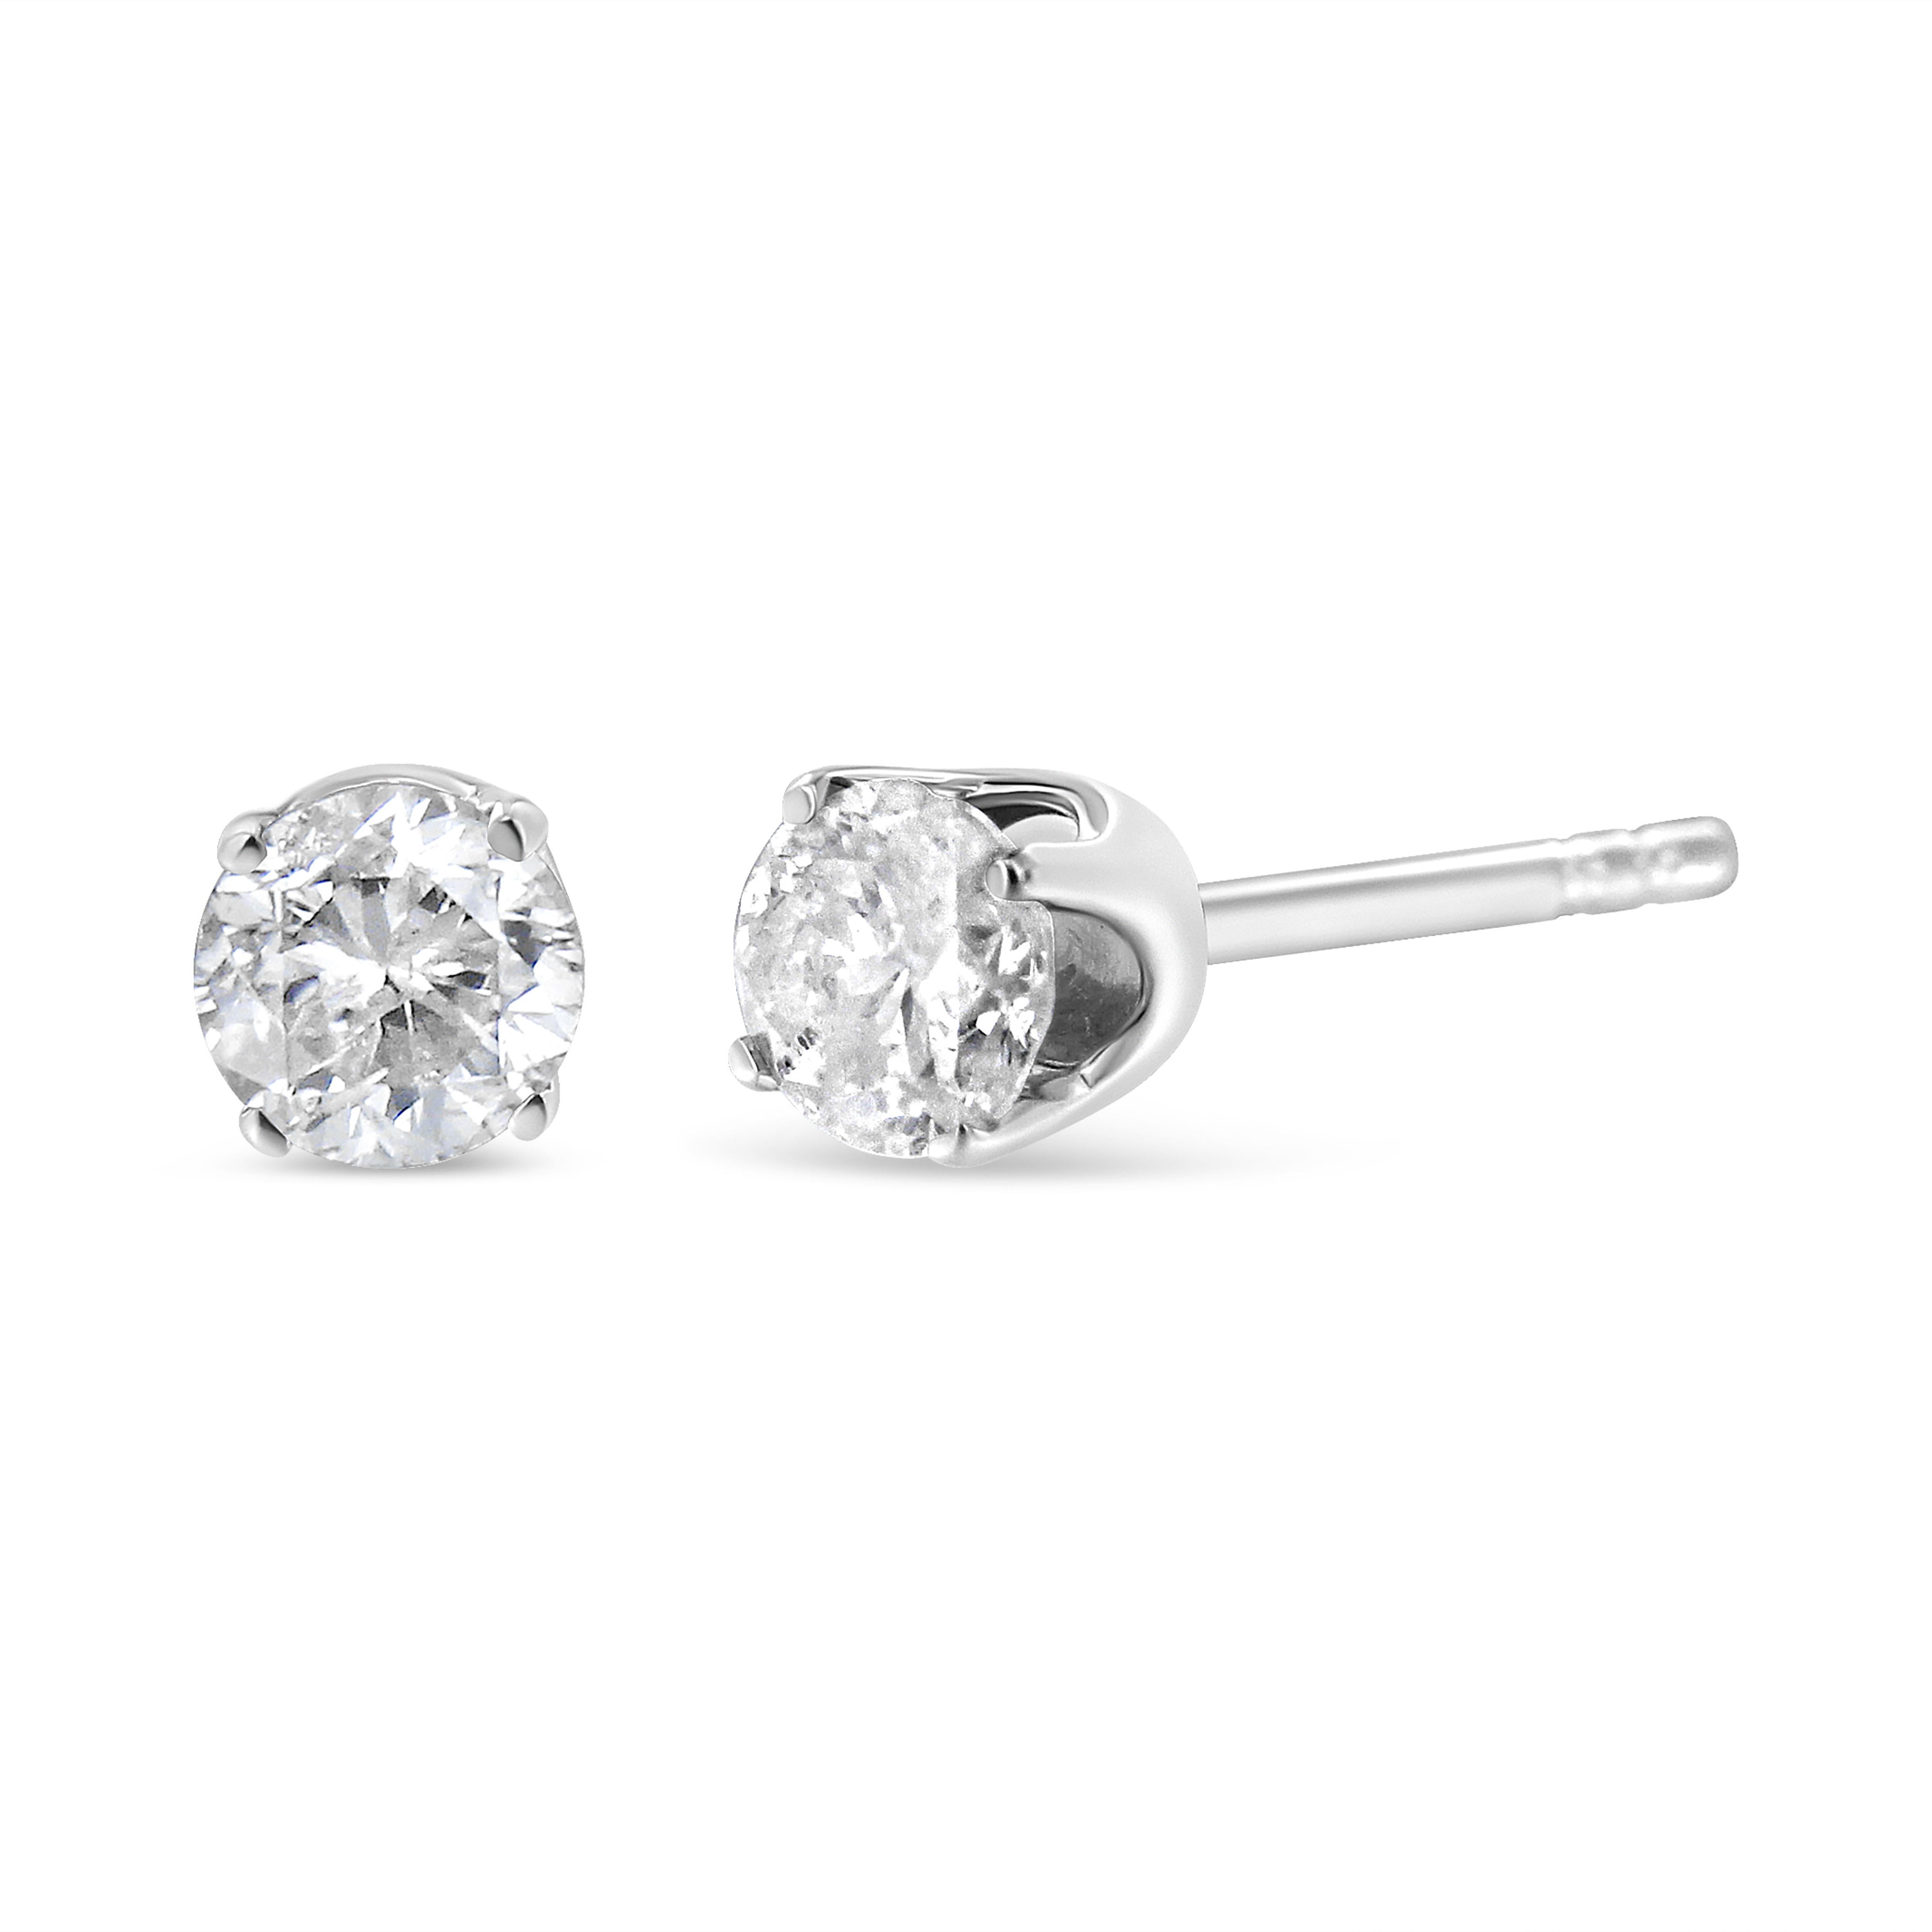 Two gorgeous white diamonds sit in a prong setting on these sparkling stud earrings. Crafted in your choice of 14k yellow or white gold, these diamond stud earrings feature a high polish finish. These stunning gold earrings feature 0.75 carats of